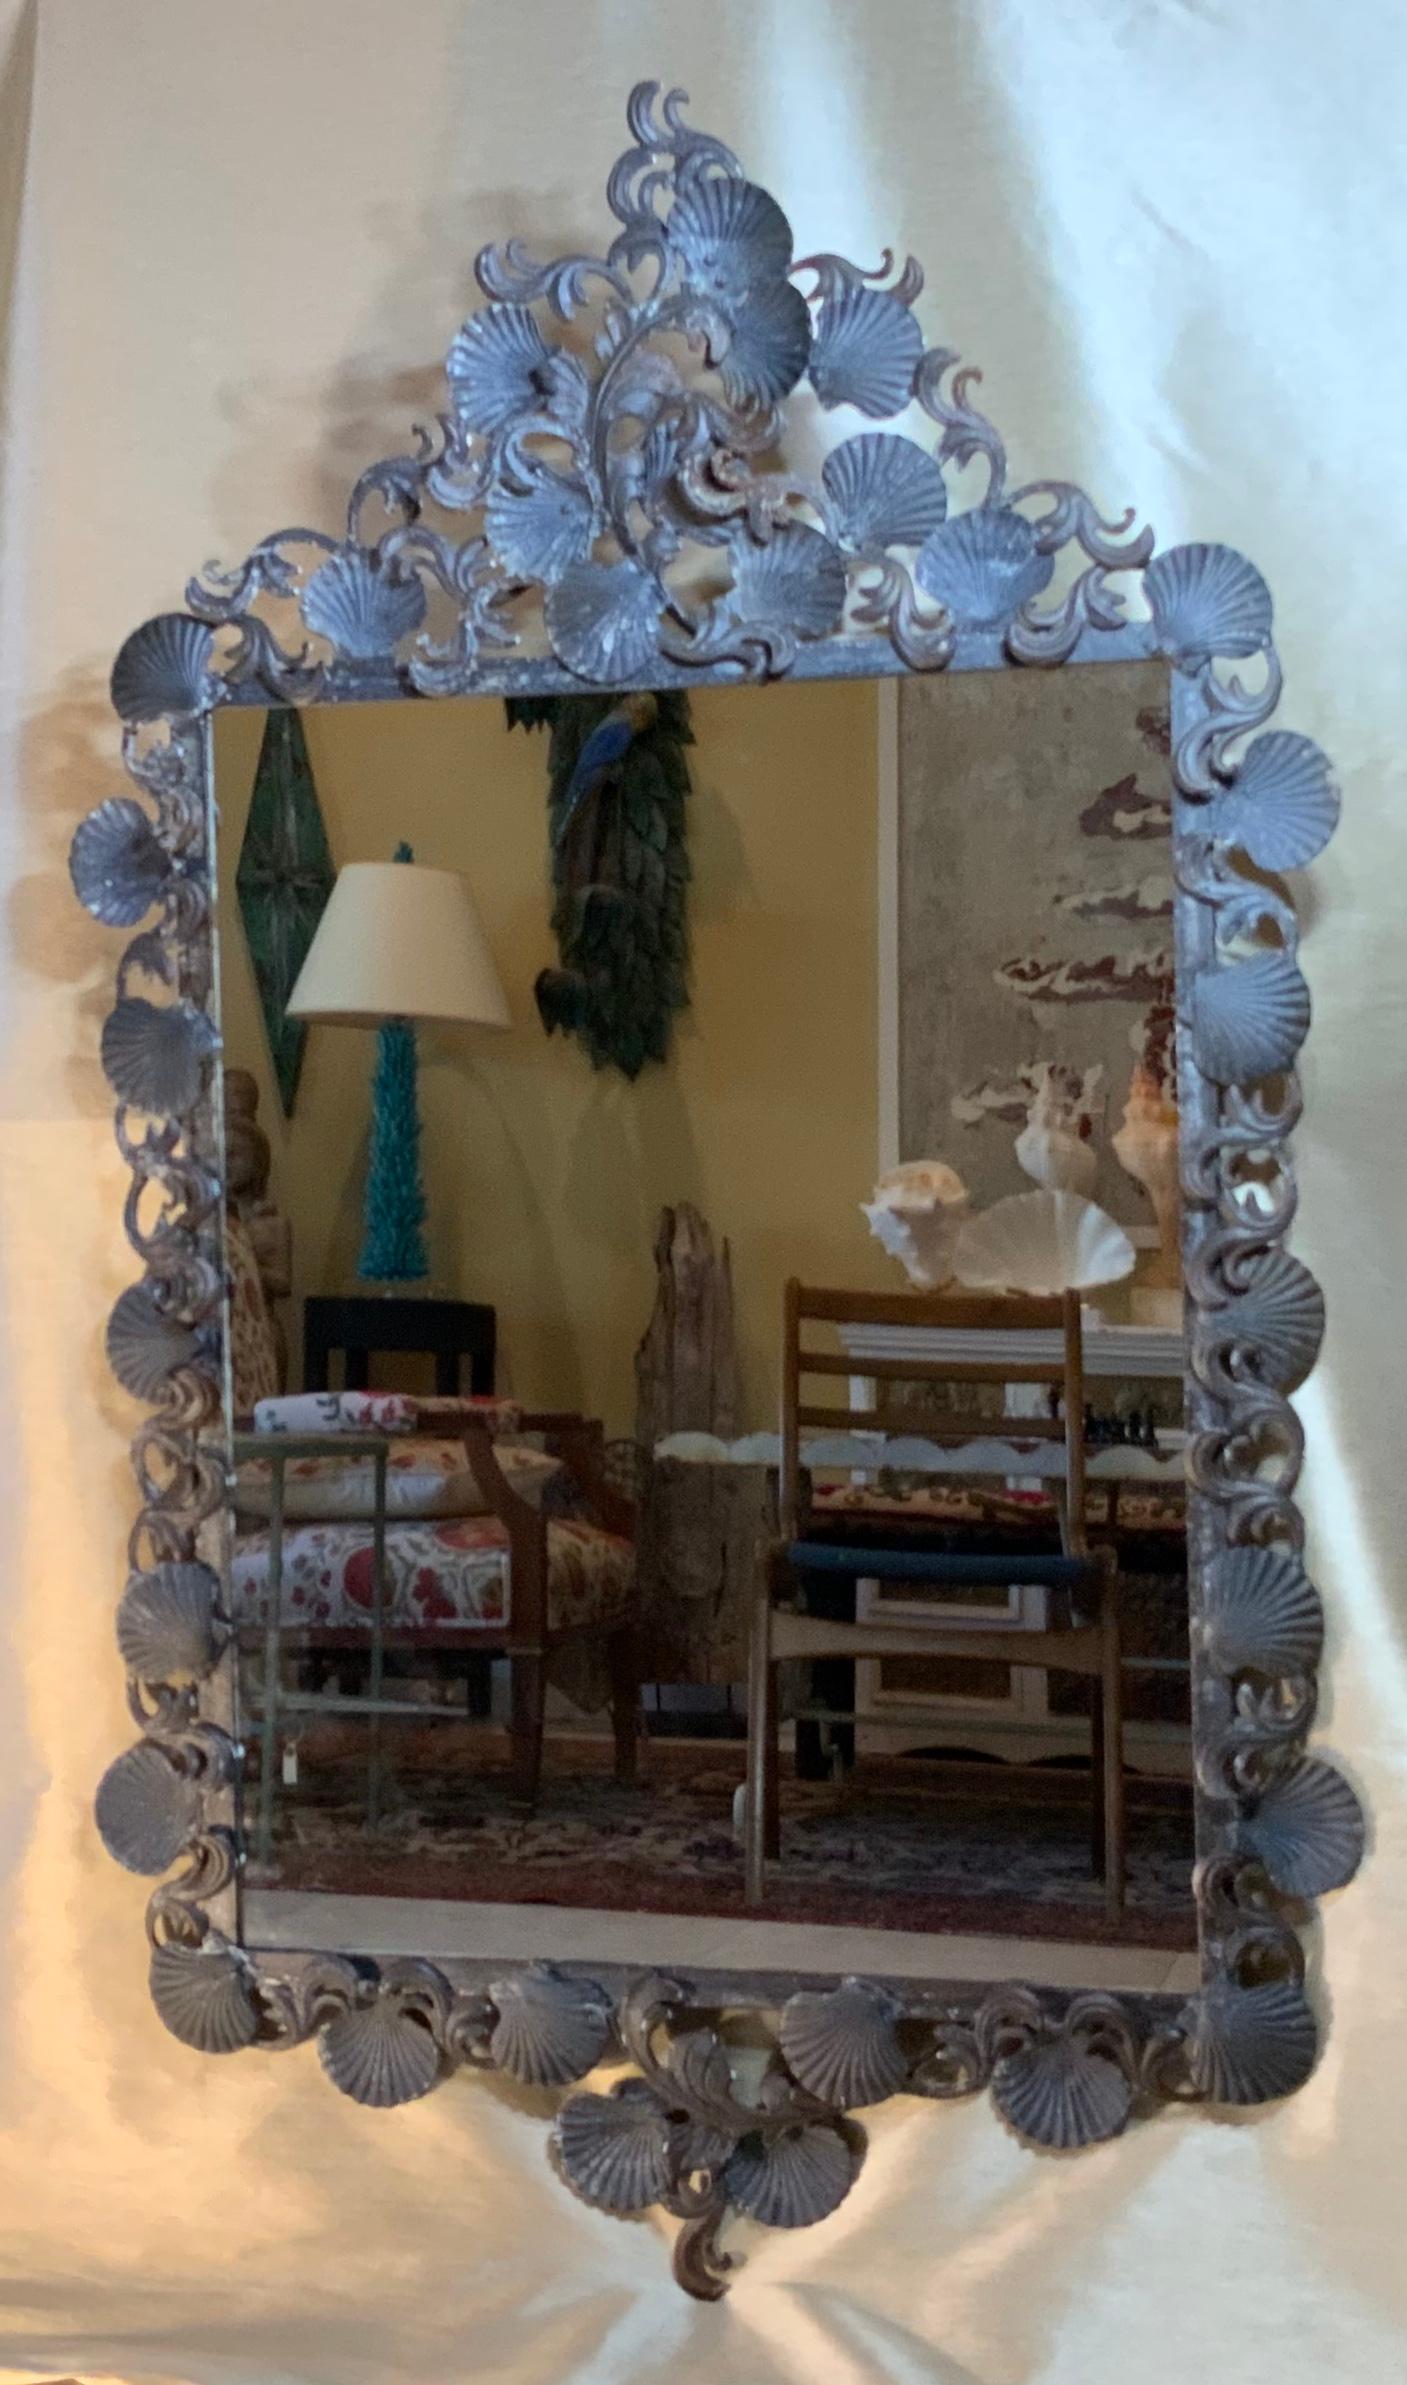 Elegant mirror made of forged and cast iron; all decorated with shells and sea star motifs.
Treated for rust.
Great patina.
Mirror size only: 26”.5 x 32”.25.